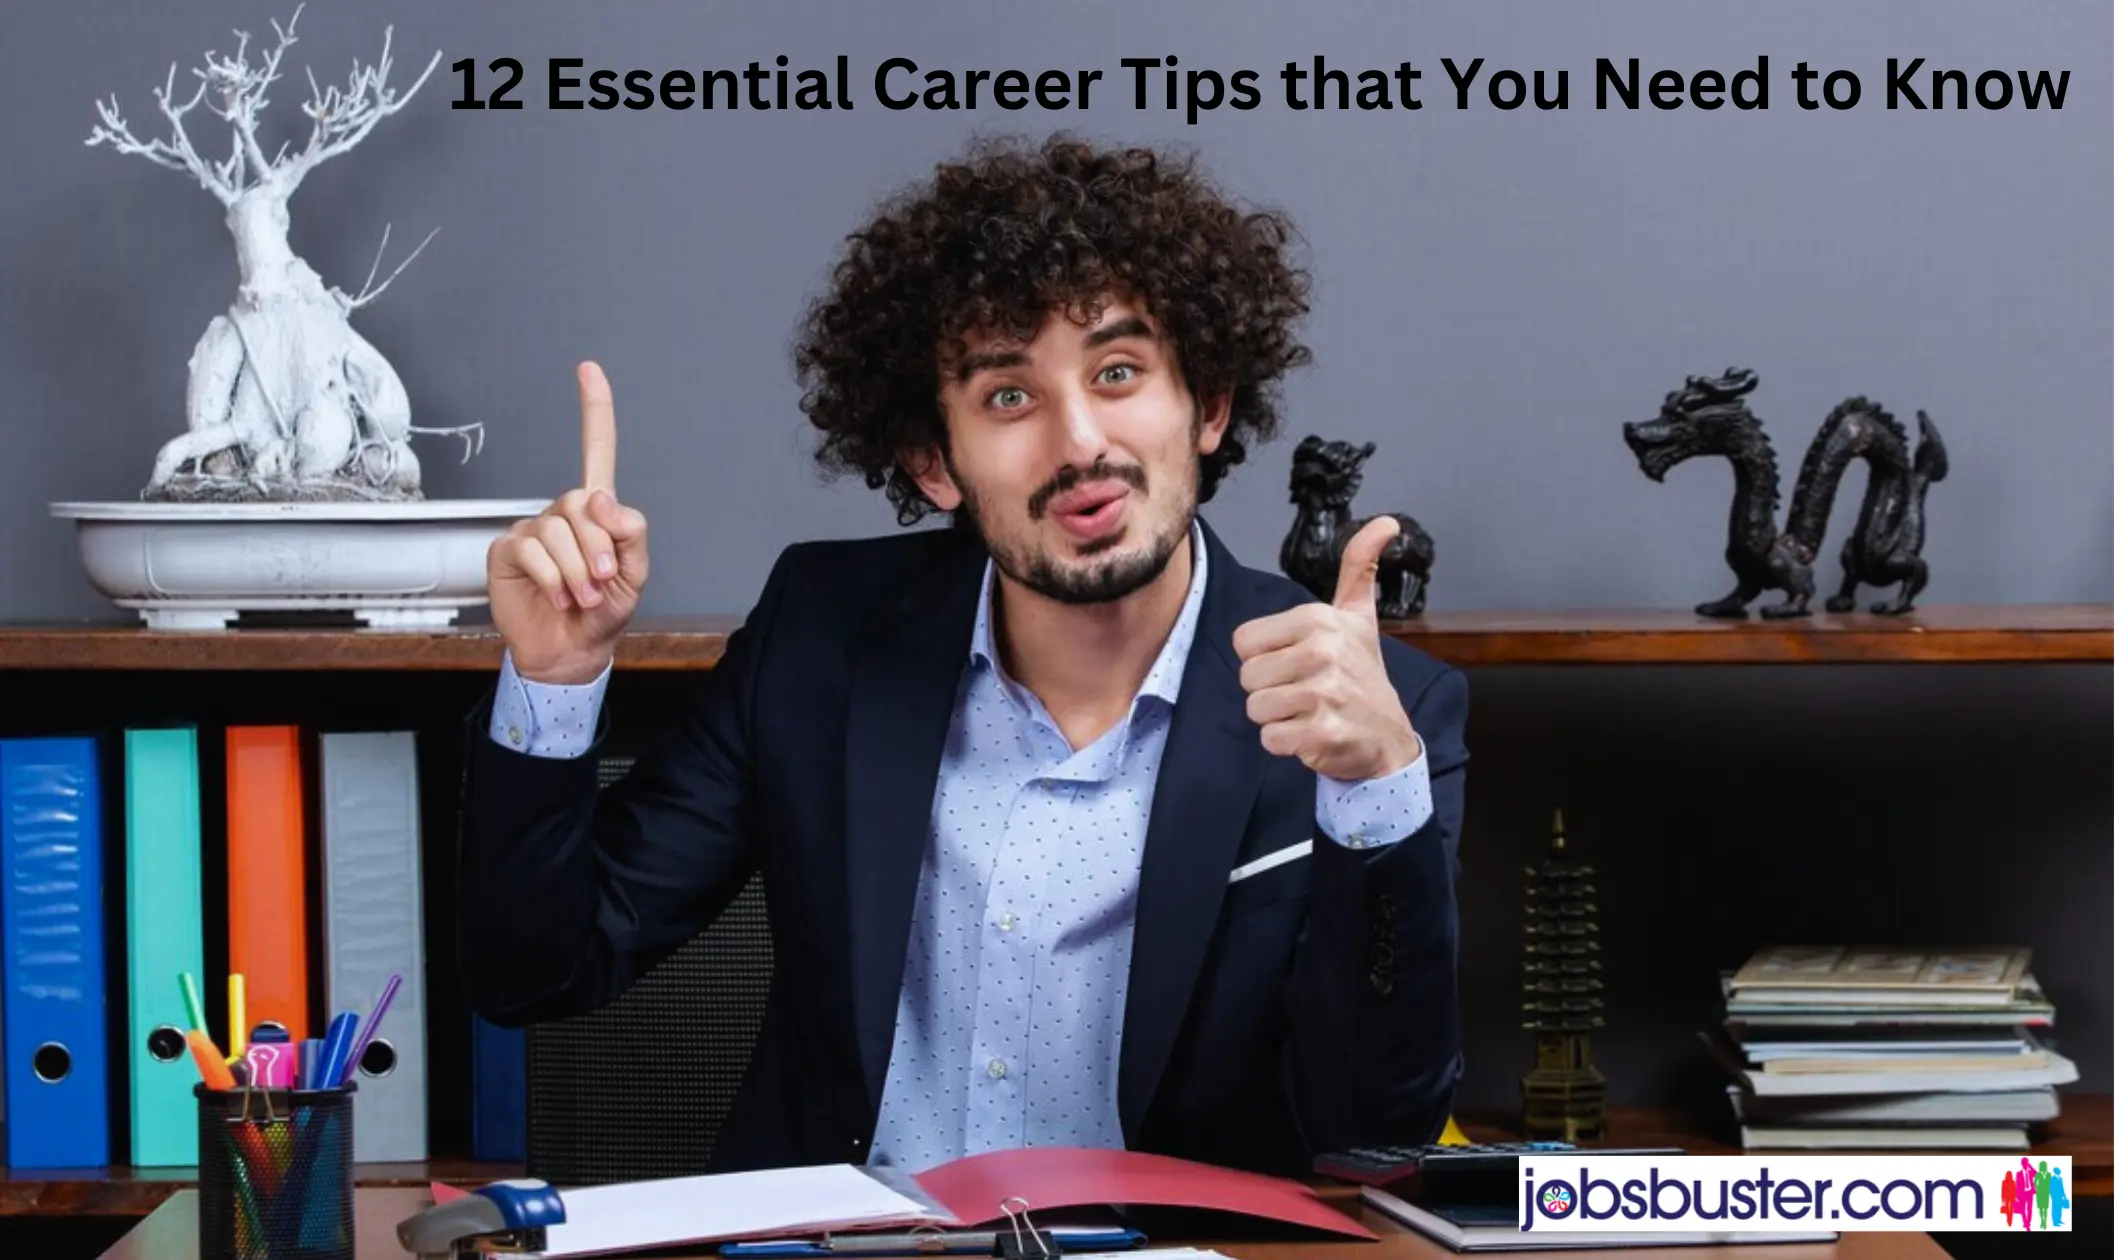 12 Essential Career Tips that You Need to Know